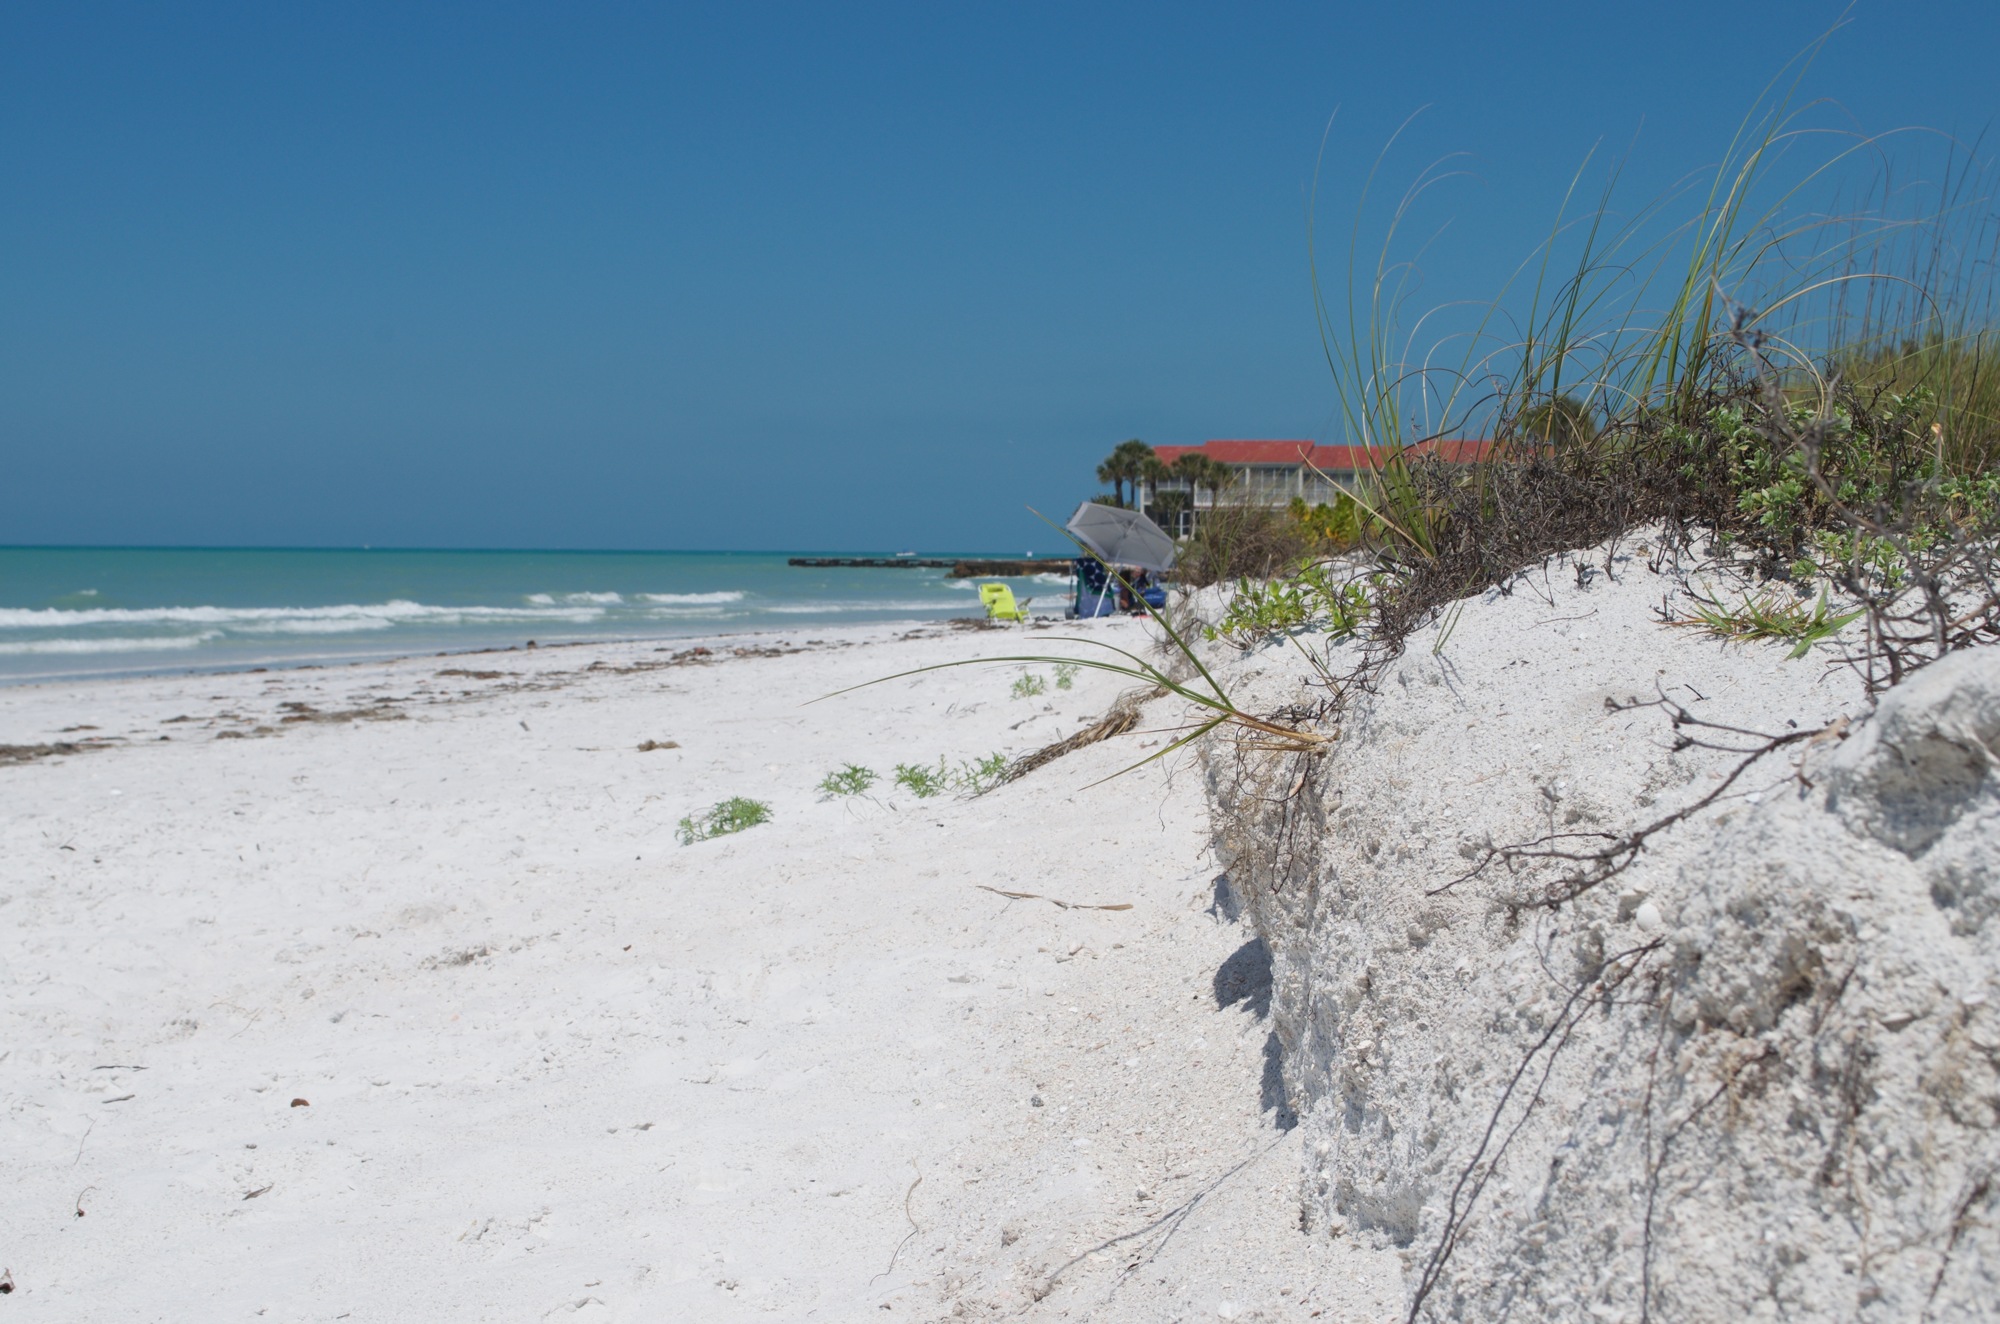 Beach management issues were tops on the lists of some Longboat Key groups.